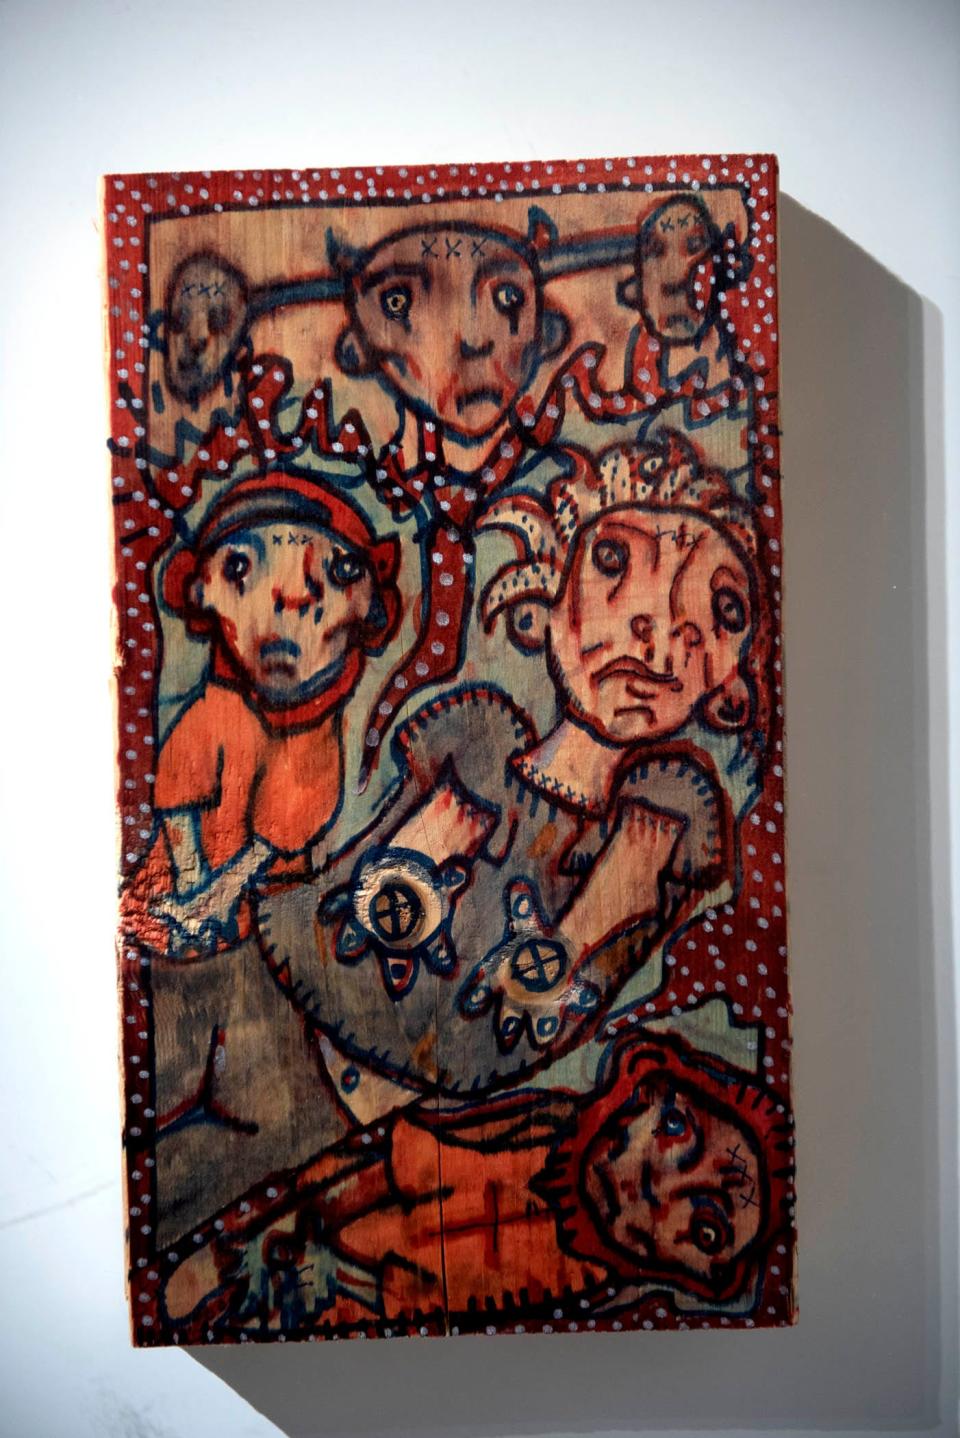 "Icon on Wood," (2000-04), by Ryan Licht Sang. This work is part of the Ryan Licht Sang Bipolar Foundation Insights VI exhibit.